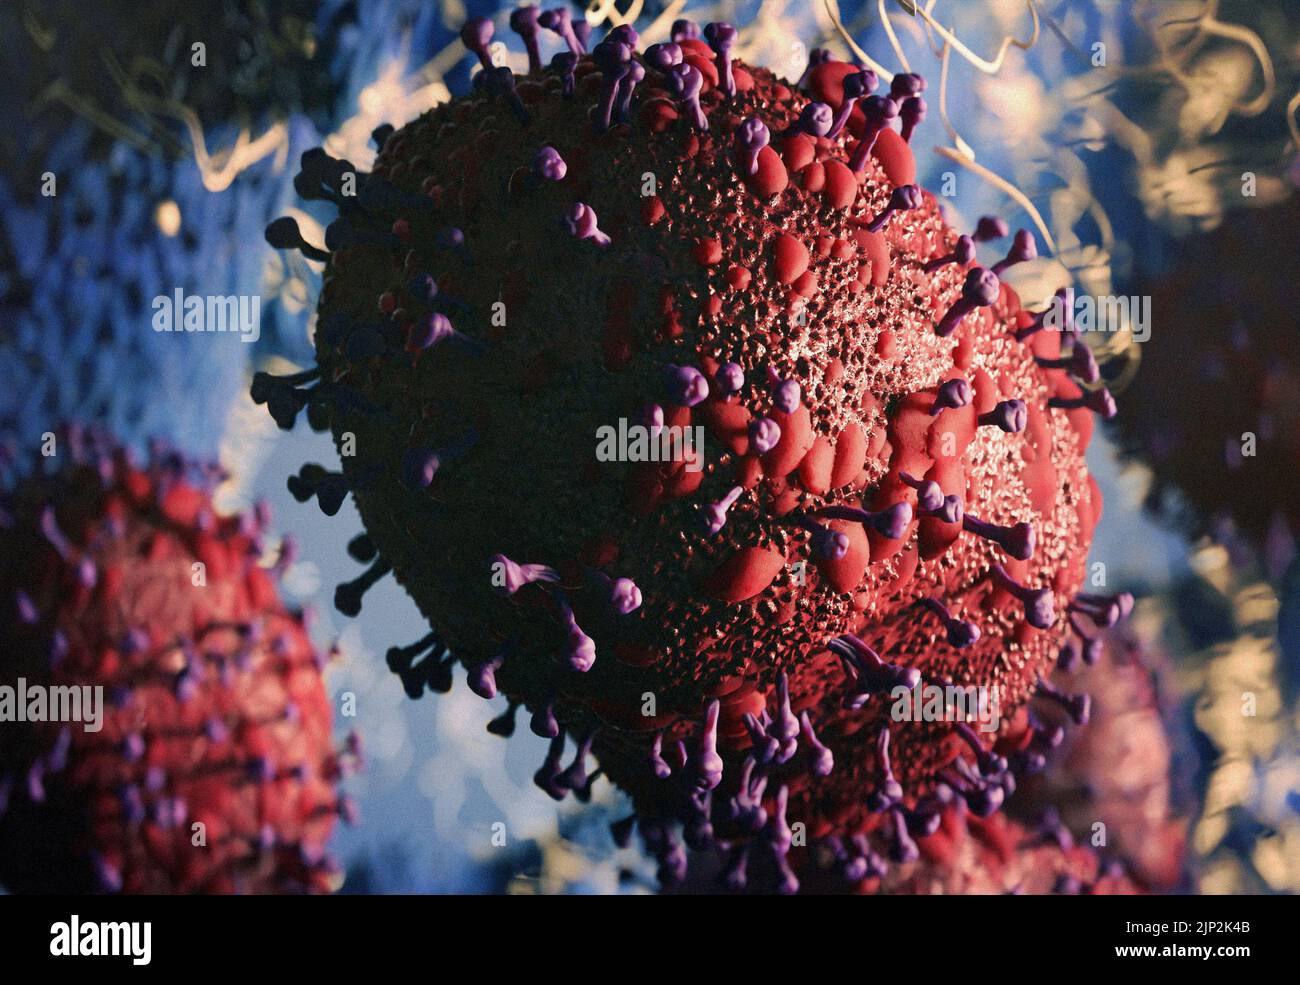 Electronic microscopy of h1n1 swine flu virus showing the spike proteins and infected human tissue, artistic reconstruction Stock Photo